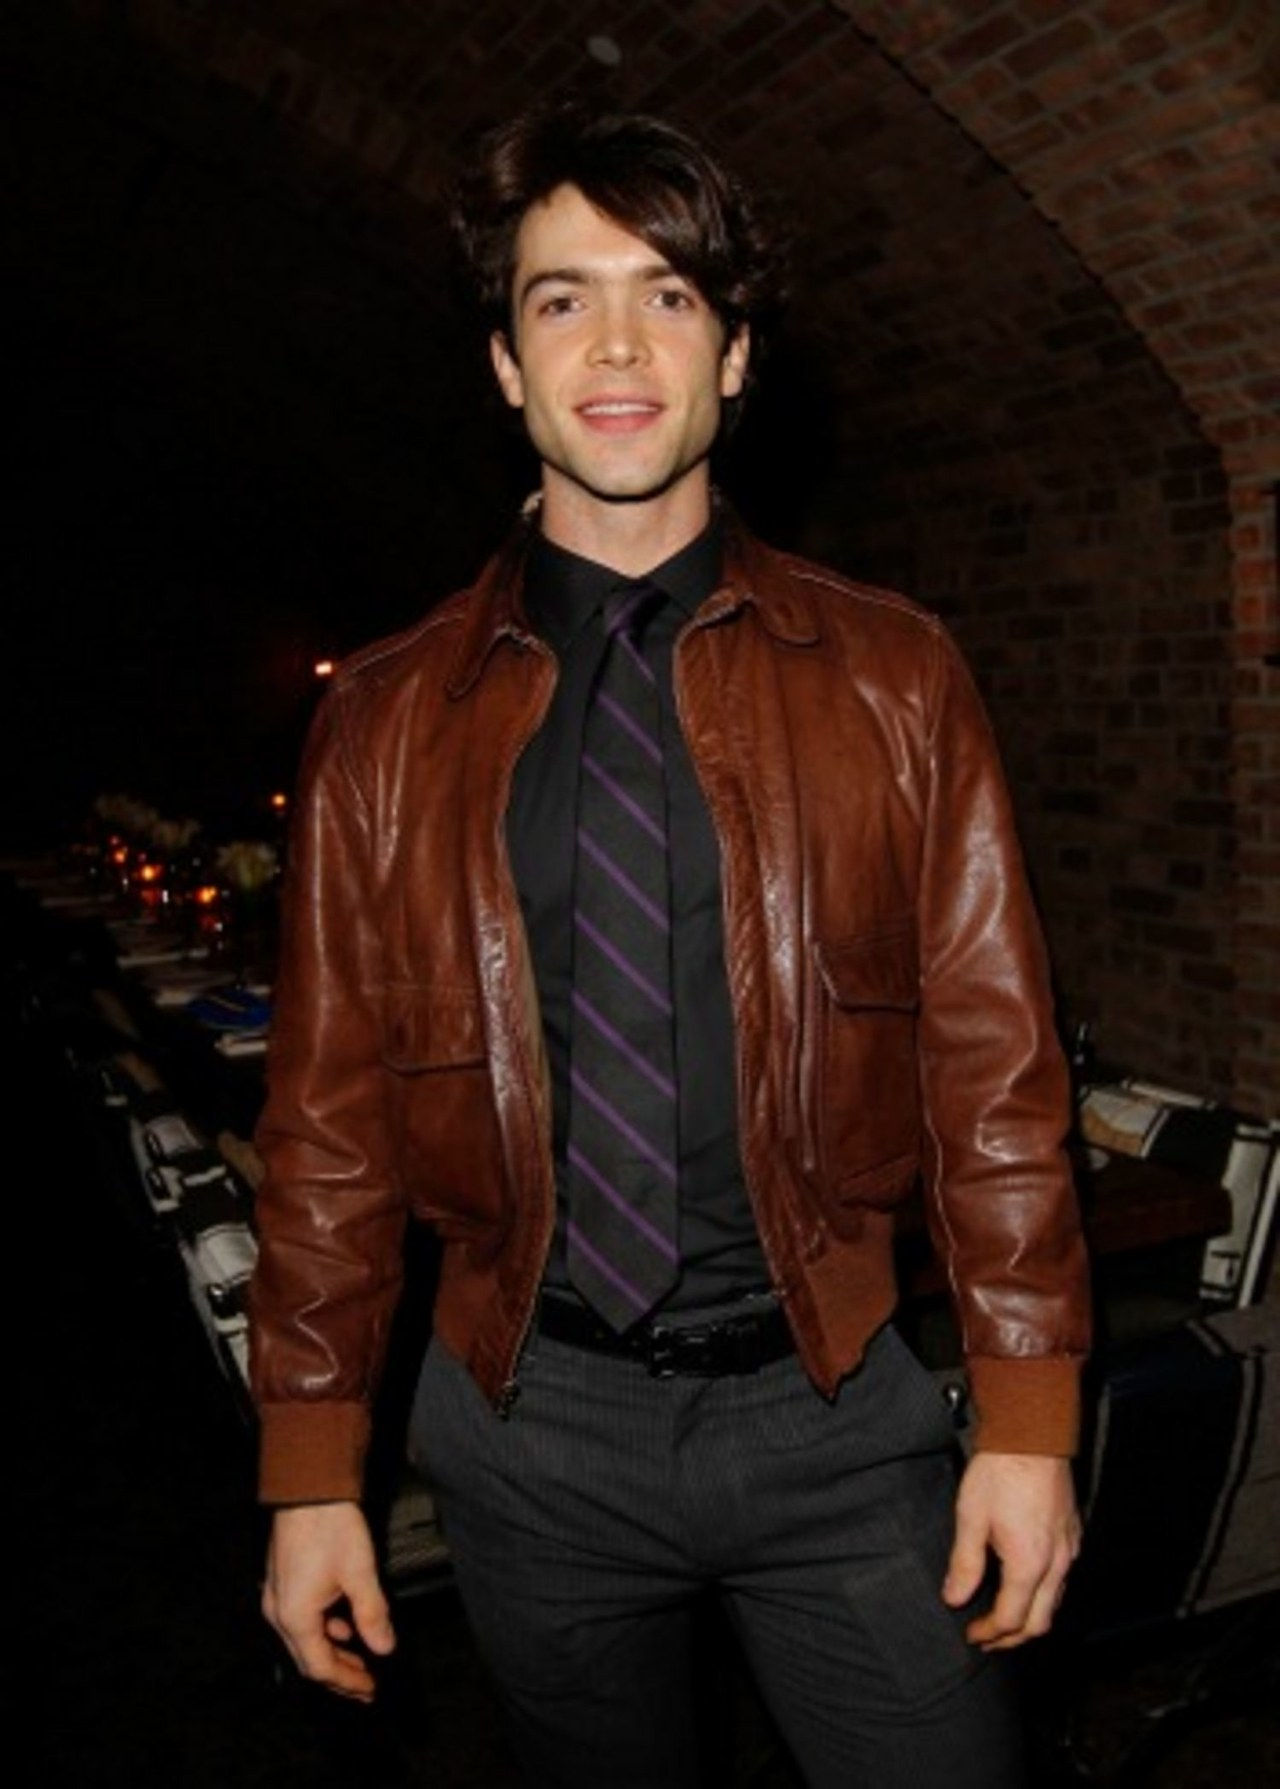 Ethan peck now